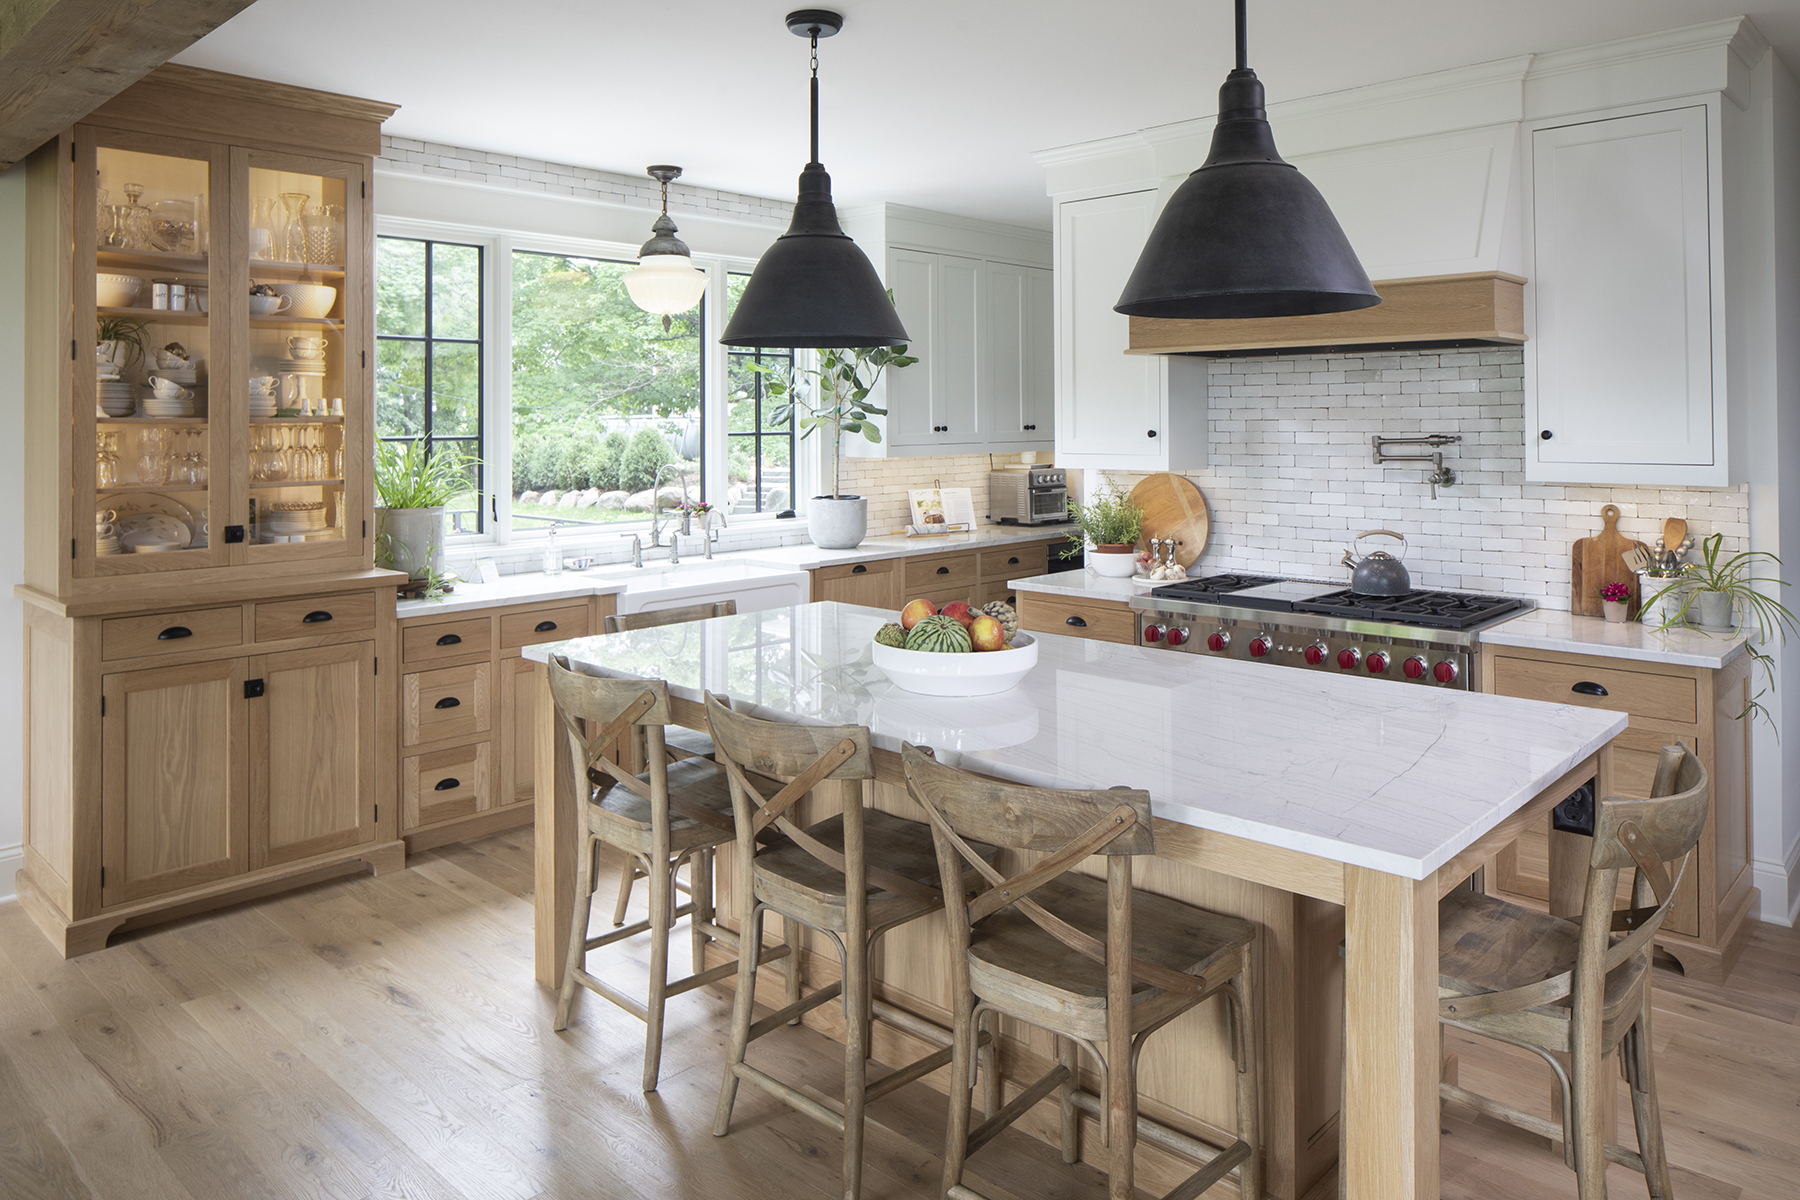 A prairie-style kitchen with a large island and wooden chairs in a custom home.